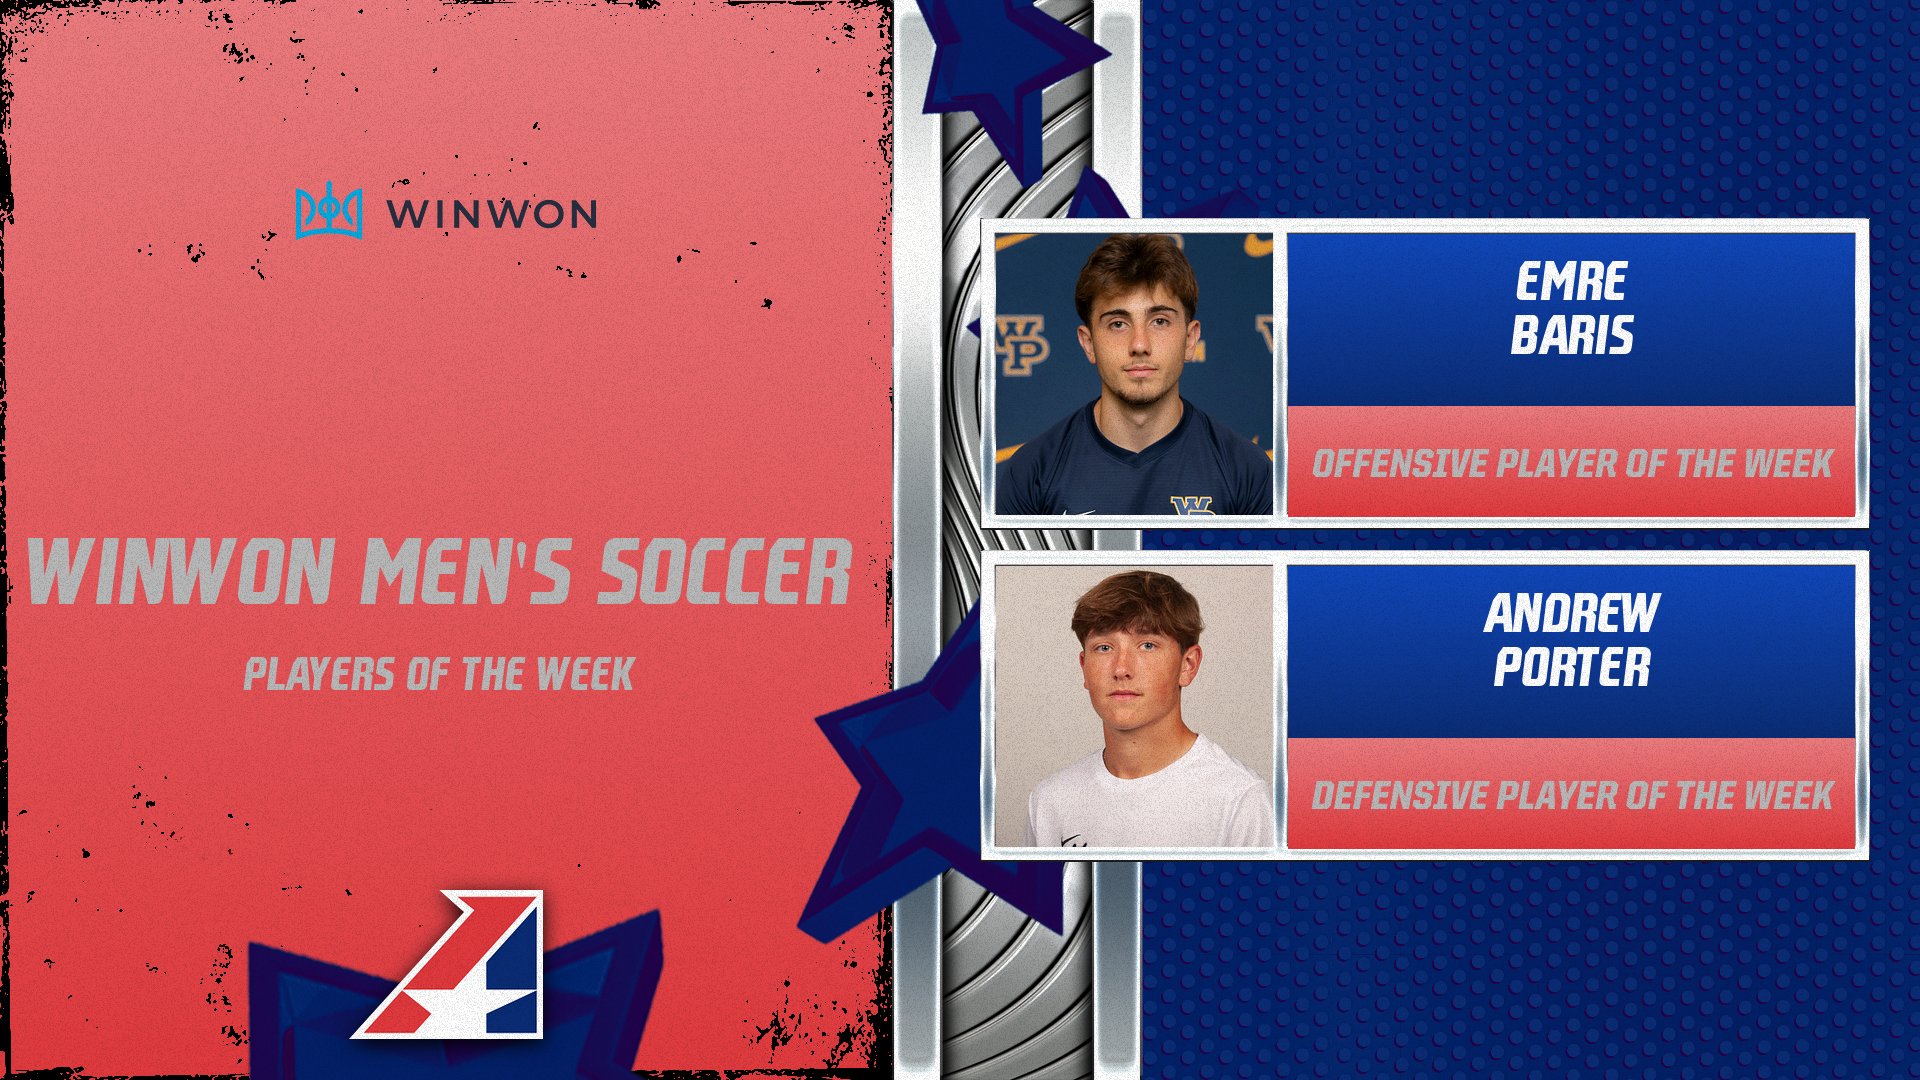 Emre Baris of WPU, Andrew Porter of Graceland Selected WinWon Men’s Soccer Players of the Week